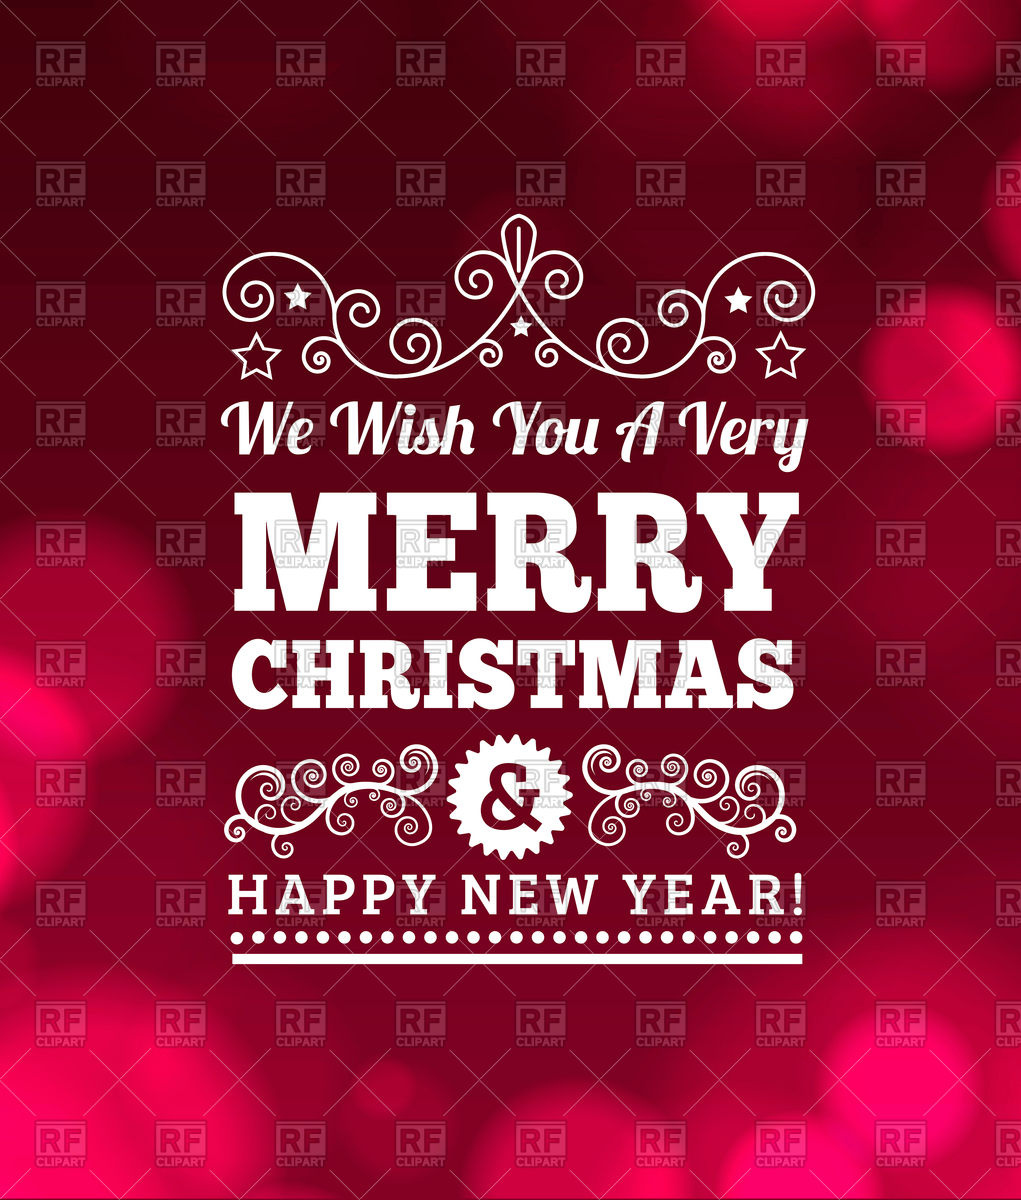 Vintage Merry Christmas background Vector Image #74537.